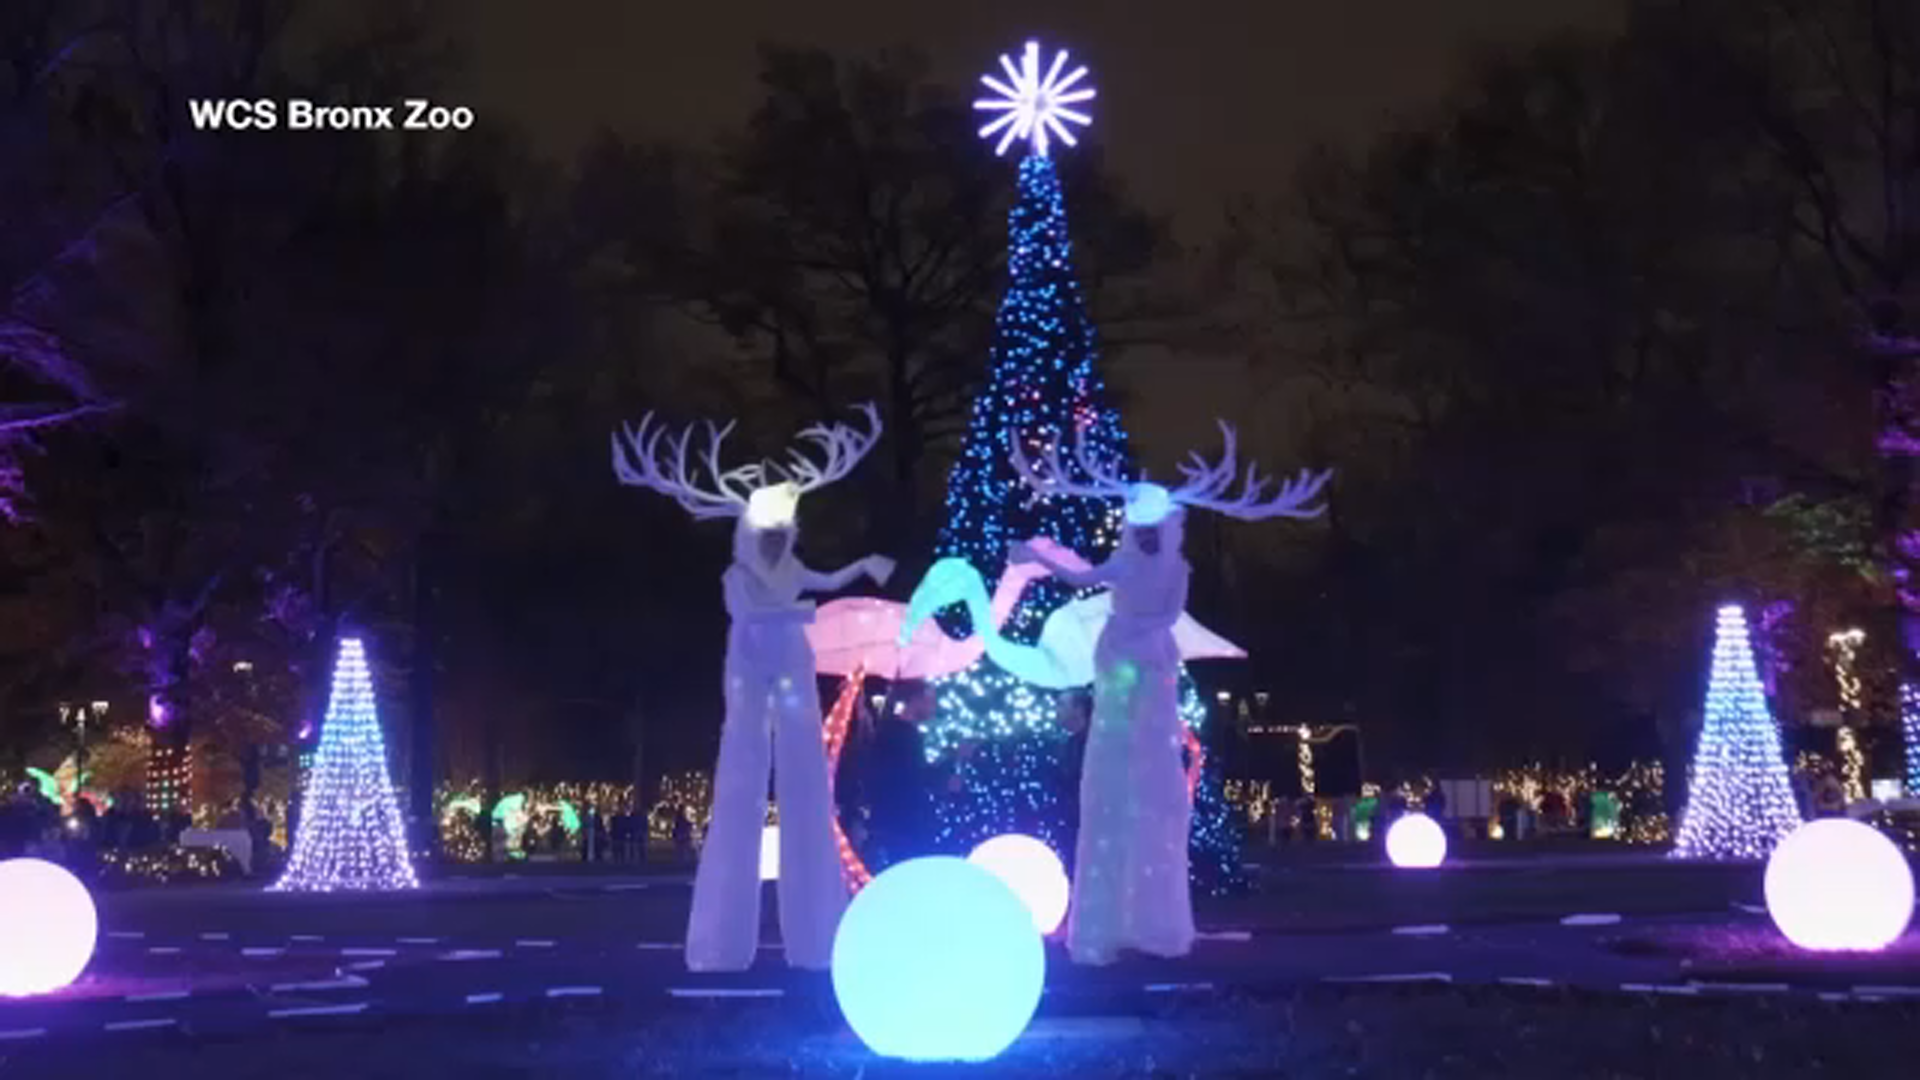 Bronx Zoo kicks gets families in the holiday spirit with ‘Holiday Lights’